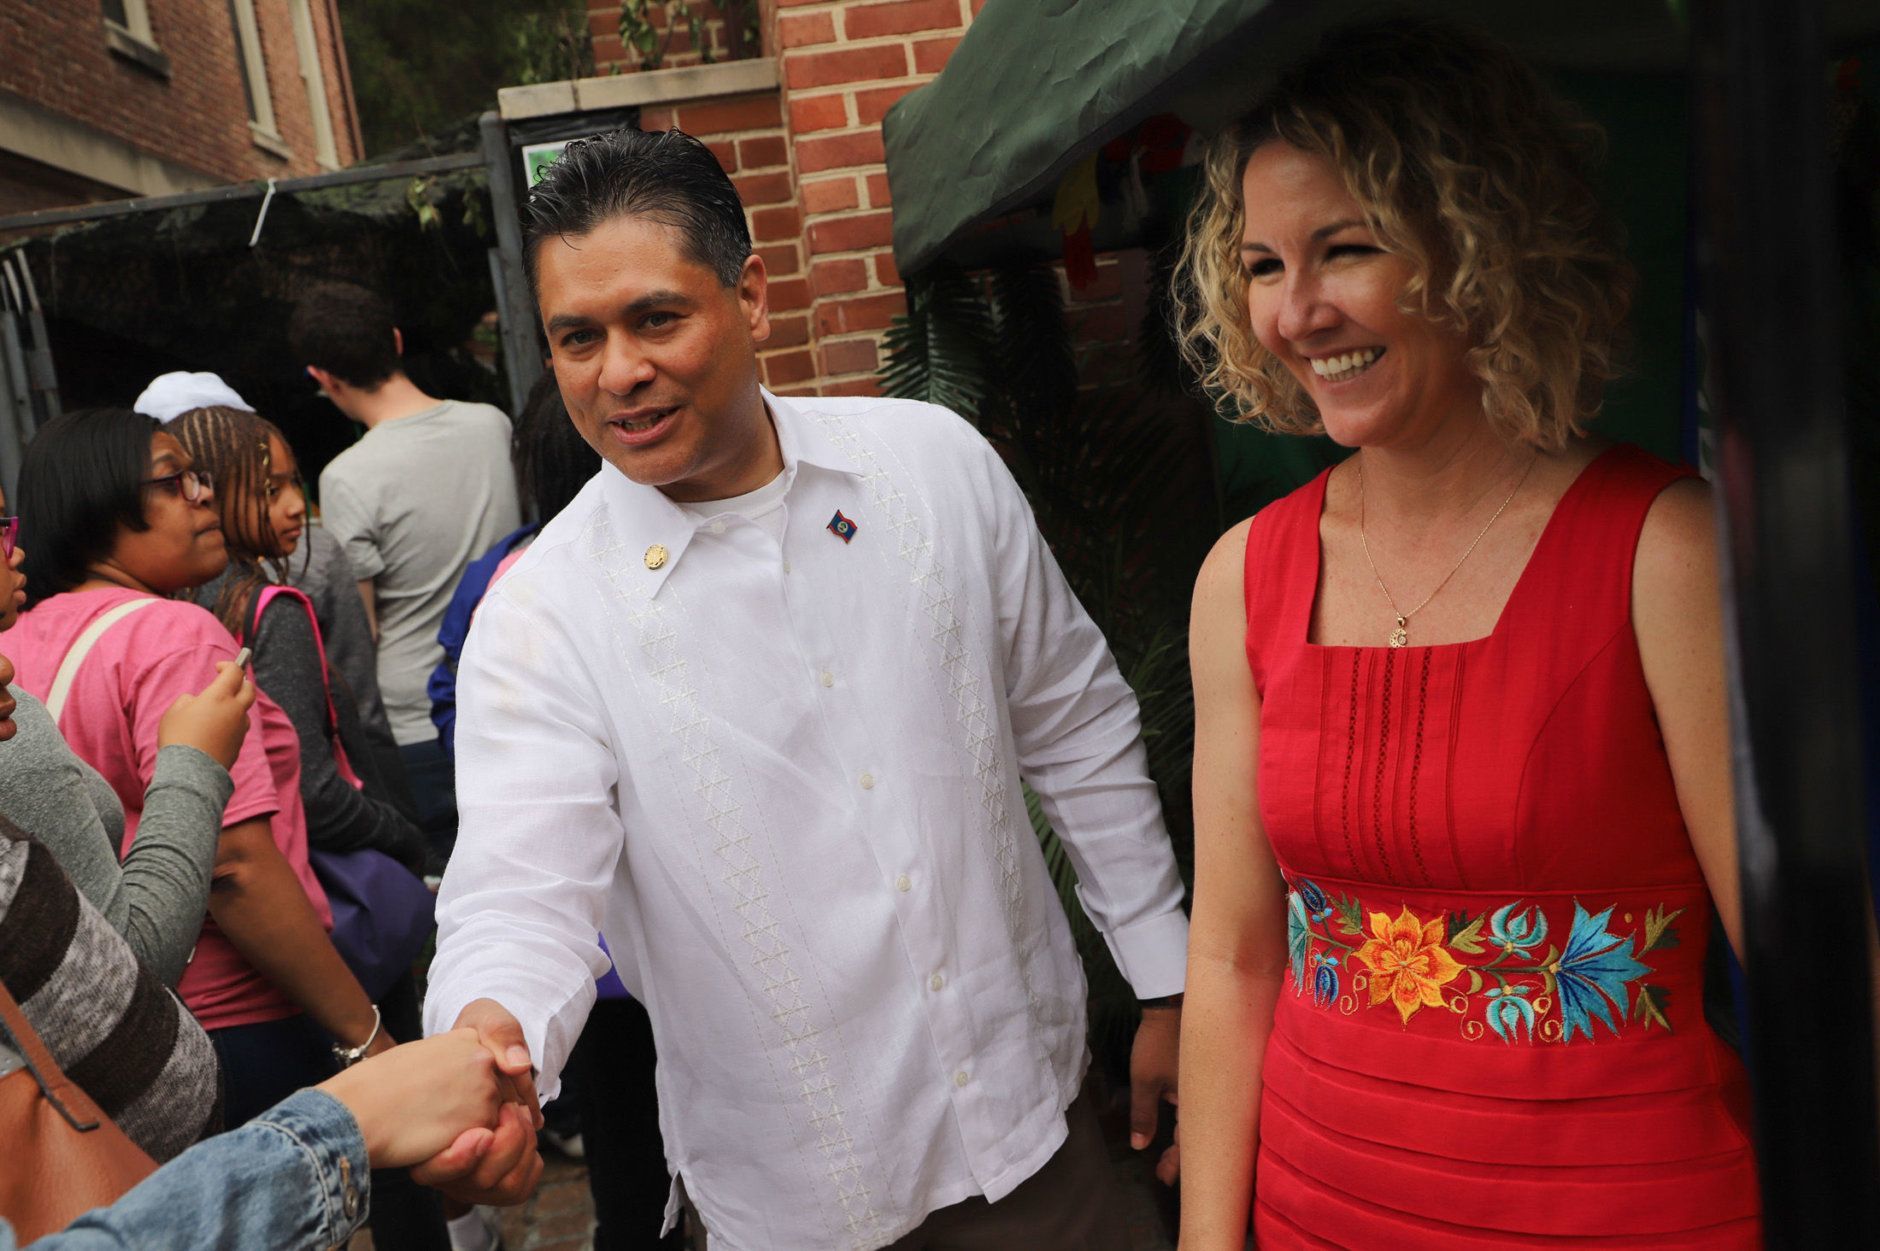 Belizean Ambassador Daniel Gutierez and his wife, Erin Ryan, greet visitors at last year's Around the World Embassy Tour. (Courtesy Cultural Tourism DC)